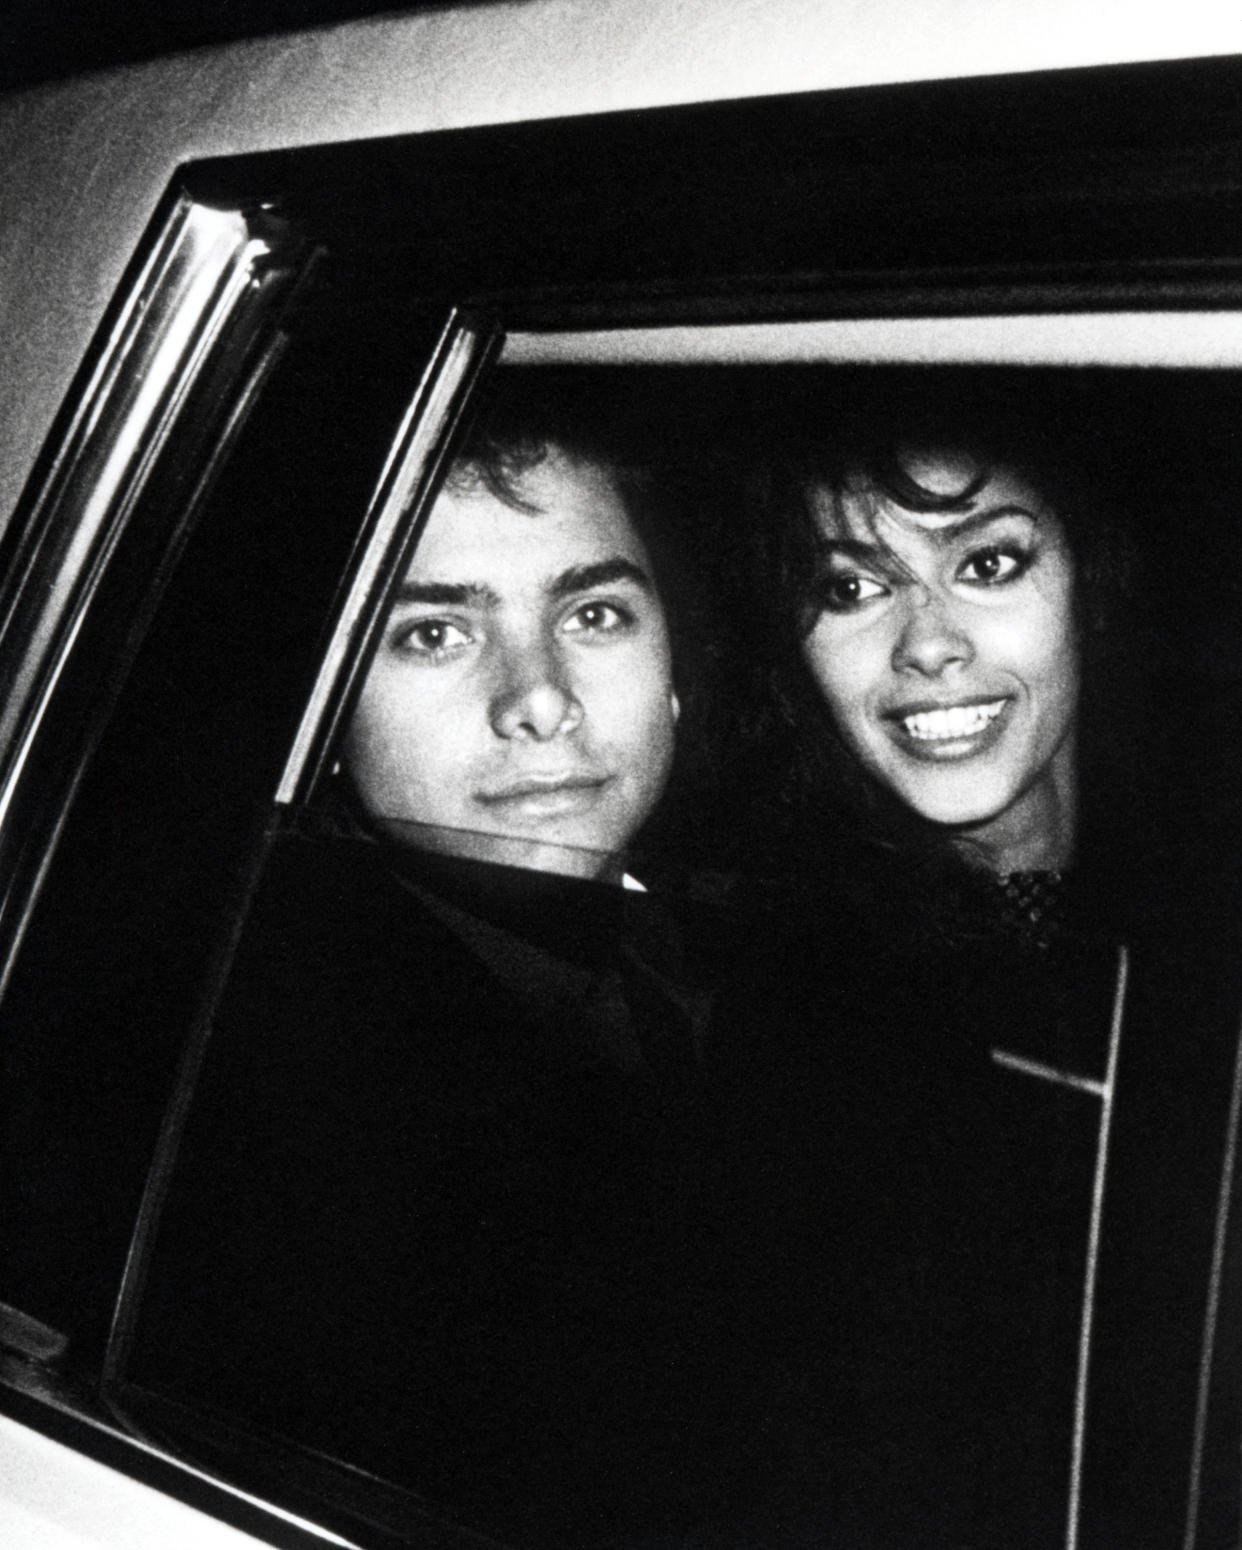 John Stamos and Vanity (Photo by Ron Galella/Ron Galella Collection via Getty Images)